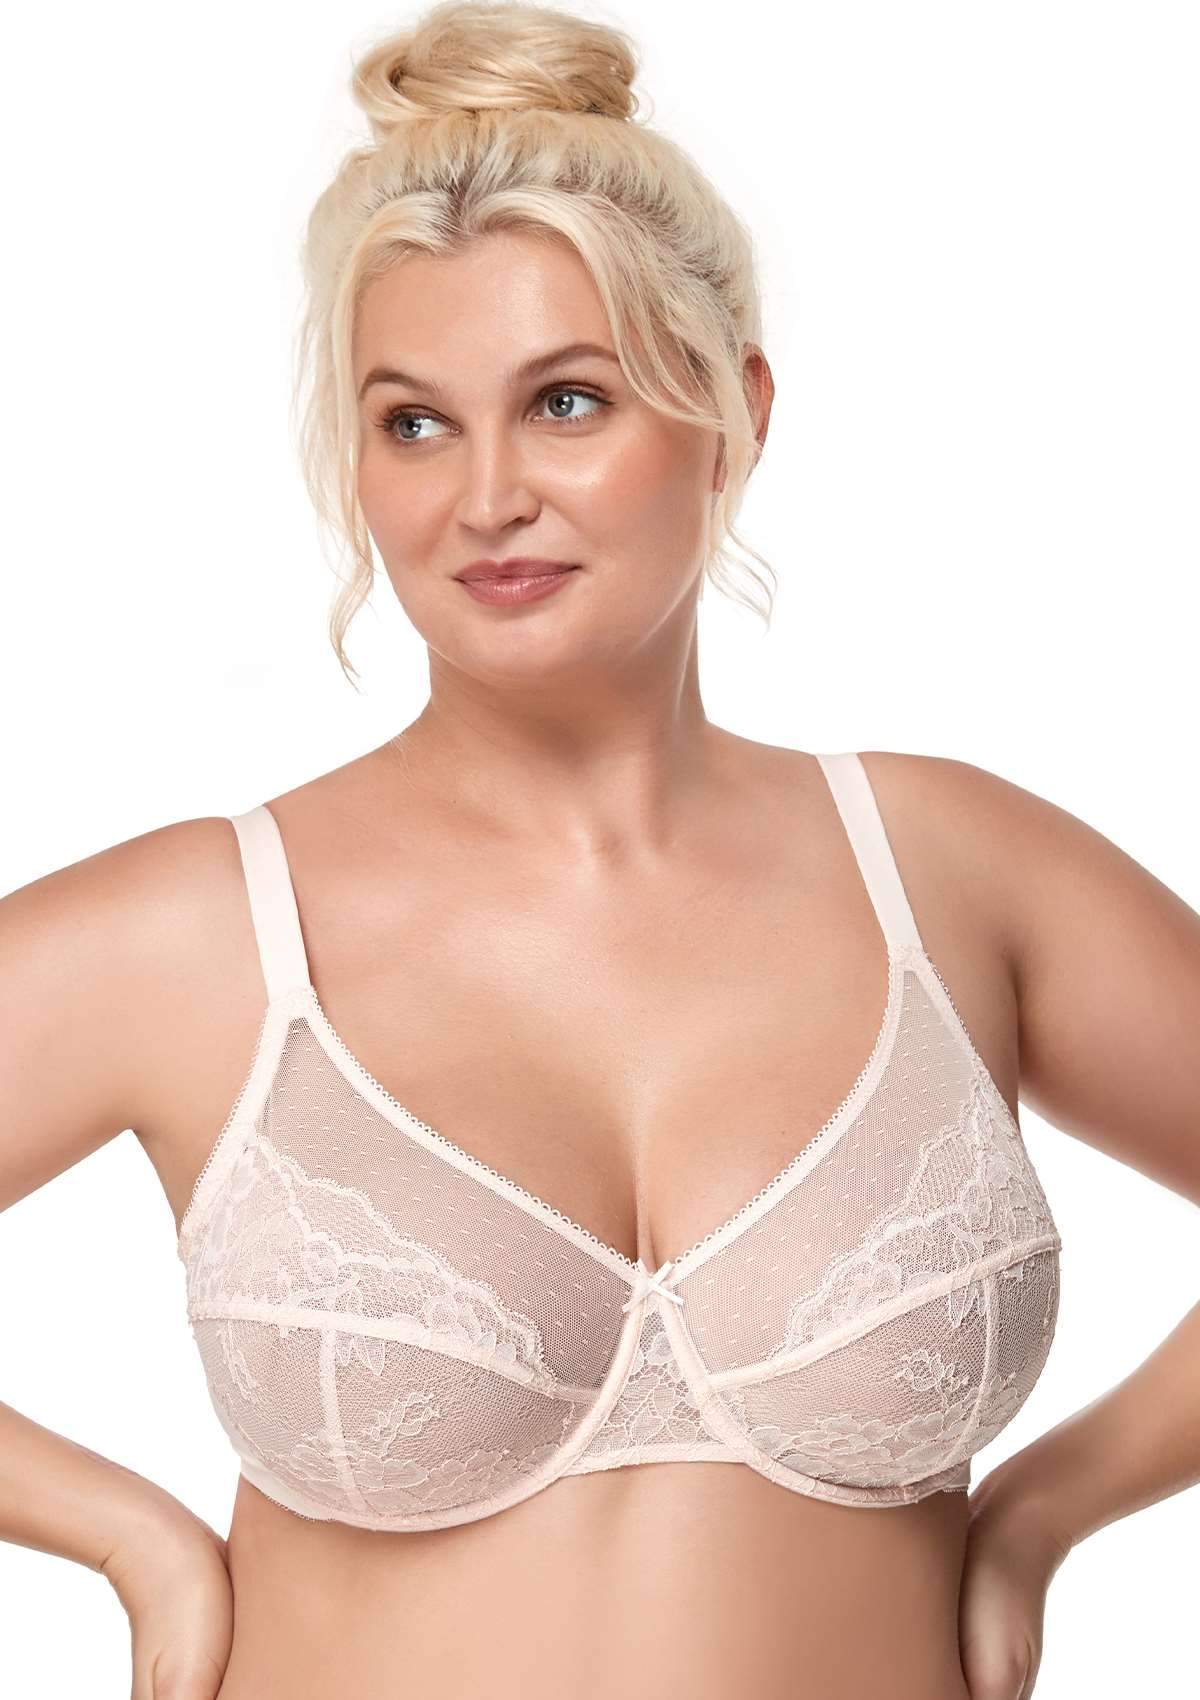 HSIA Enchante Lacy Bra: Comfy Sheer Lace Bra With Lift - Dusty Peach / 40 / C